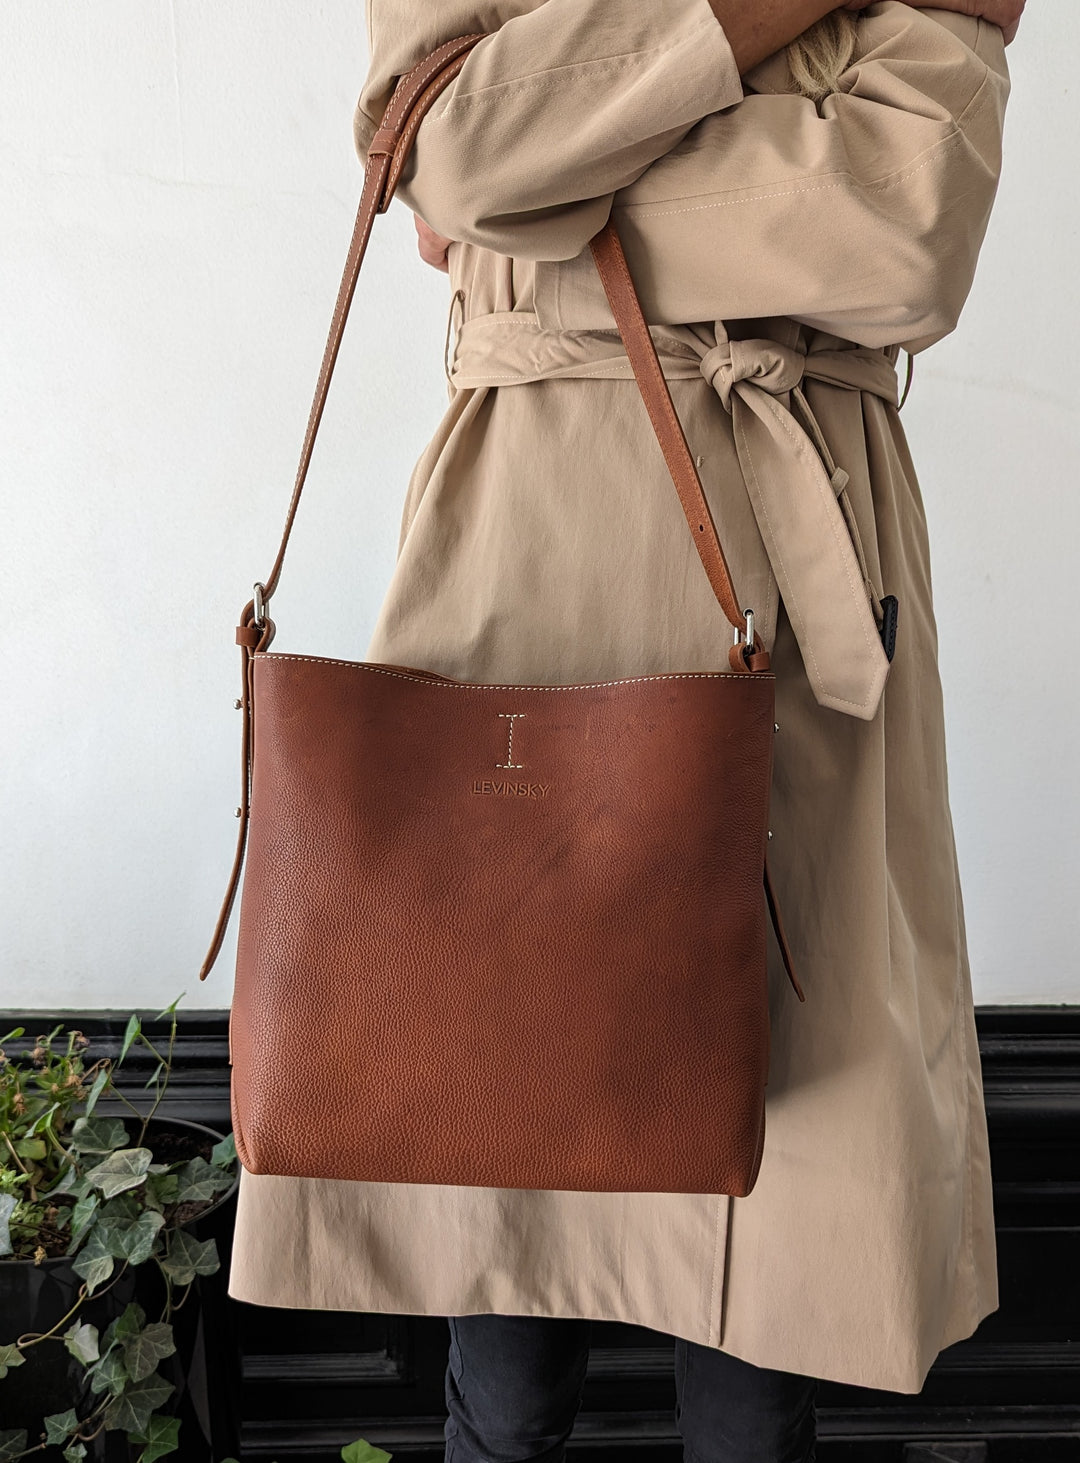 Tote 14846 - Leather bag Accesories - Cognac